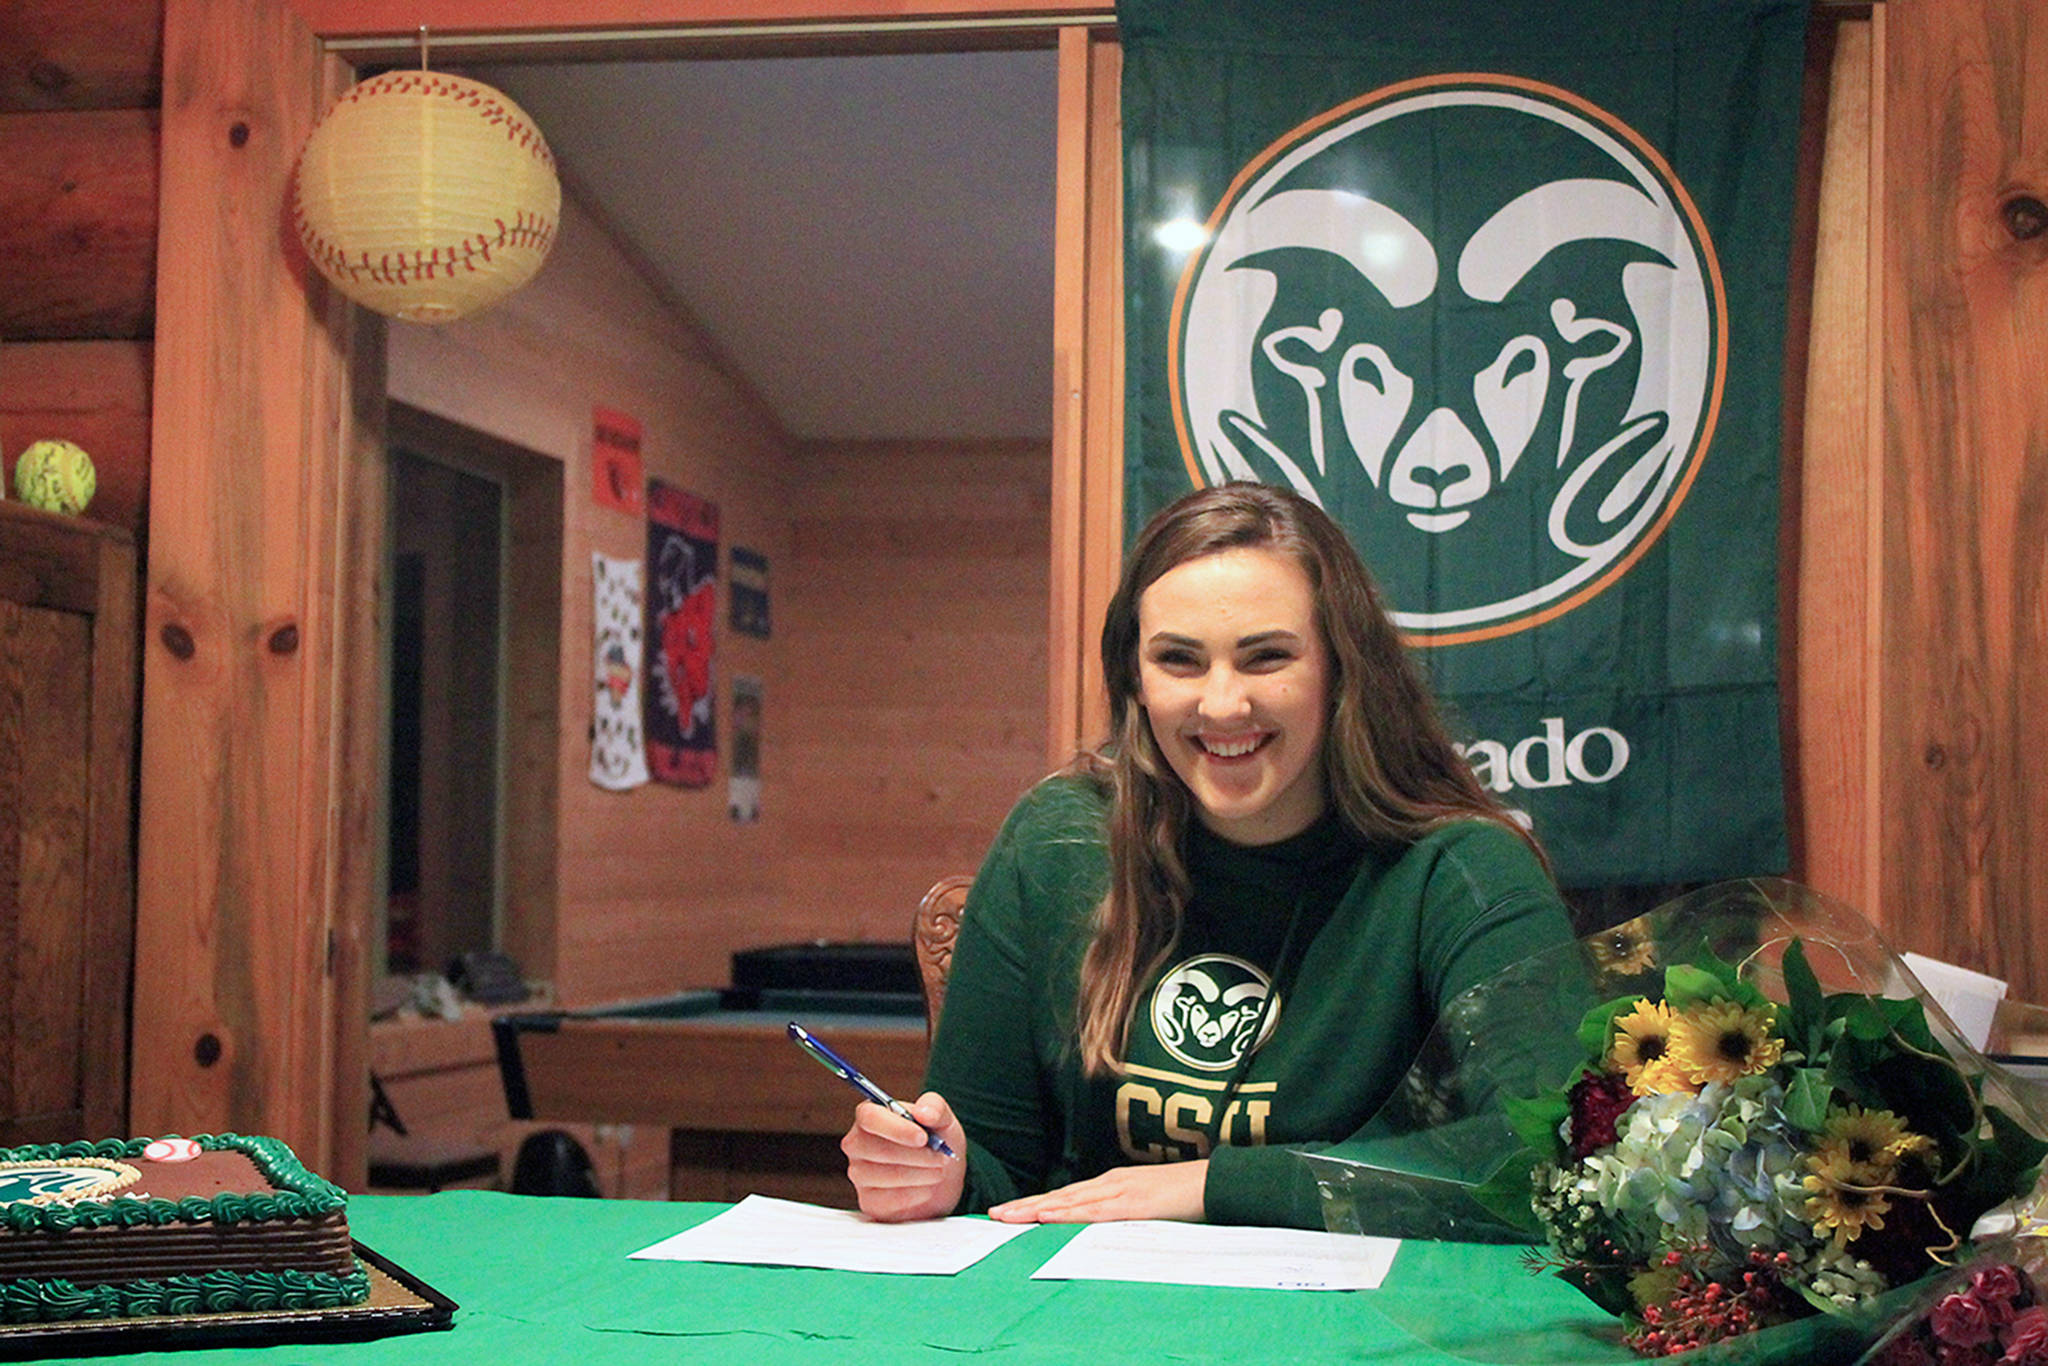 South Whidbey softball standout inks letter of intent with Division 1 team